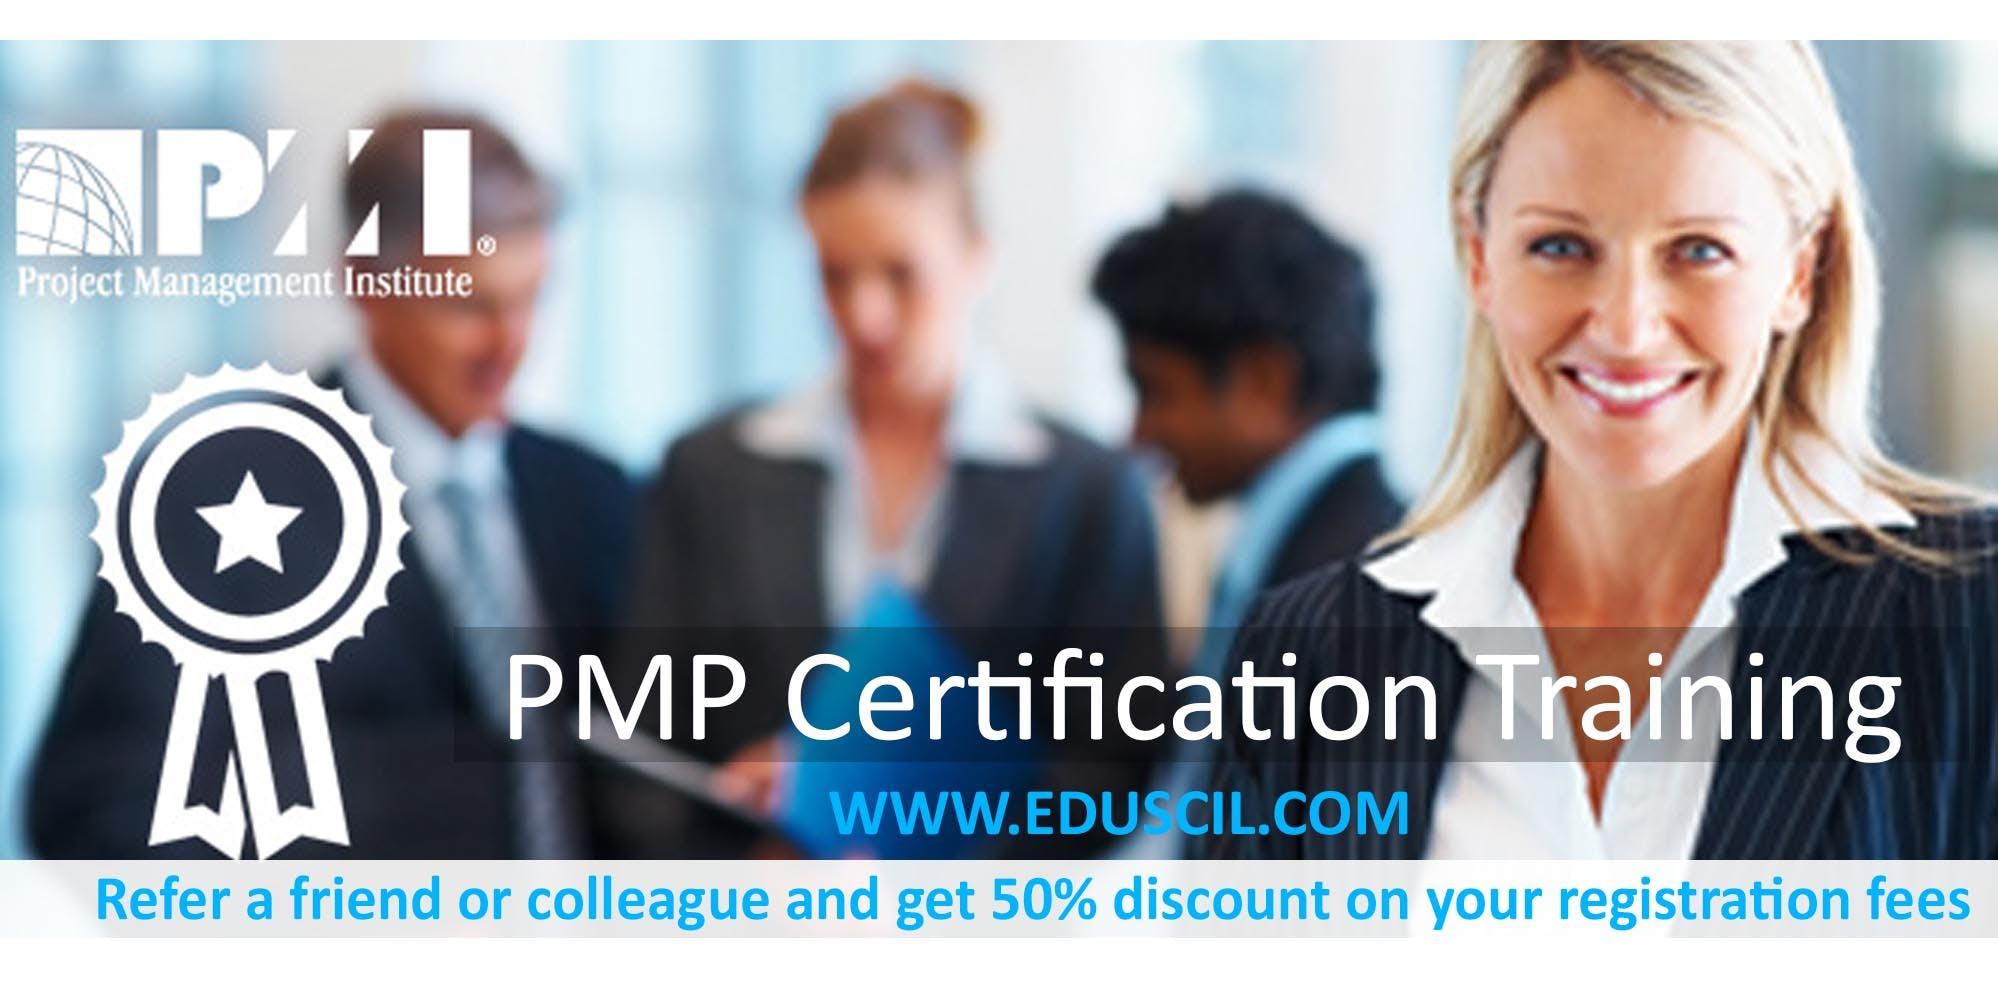 Project Management Professional (PMP) Boot Camp in Downey, CA-USA|Eduscil